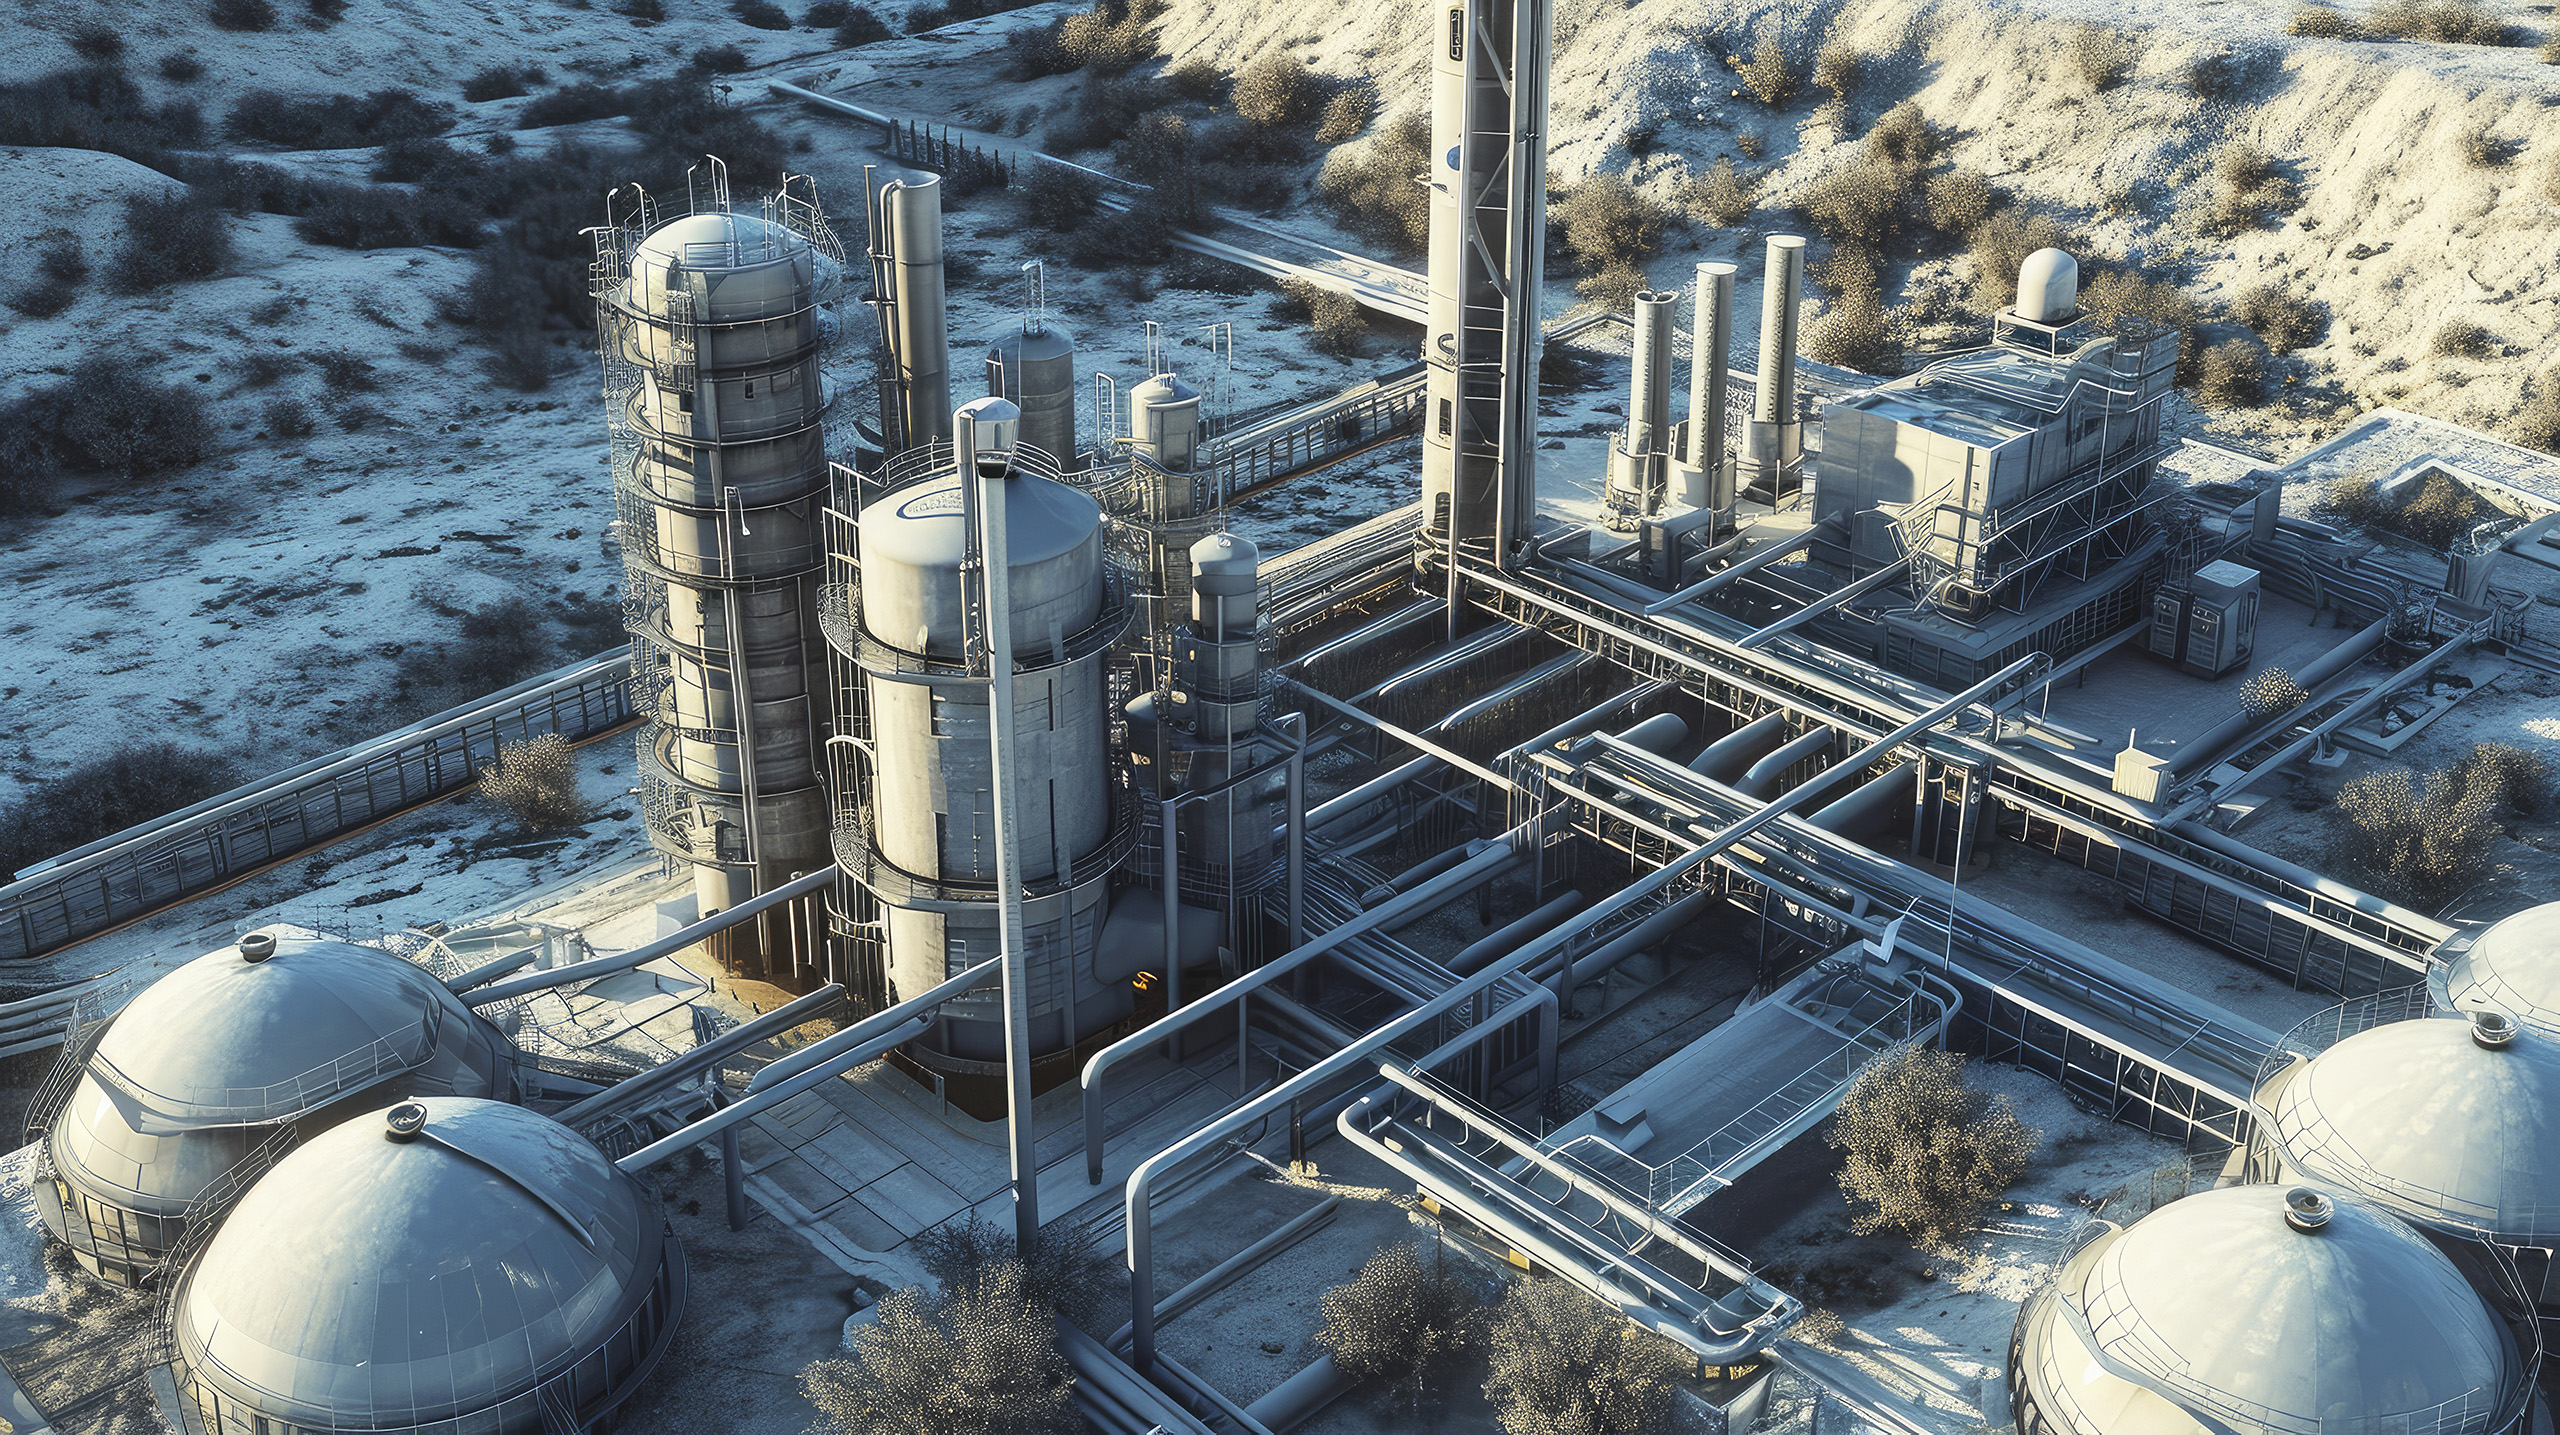 CONSTRUCTION UNIT BEGINS DEVELOPMENT FOR PHOSPHATE RECOVERY PLANT